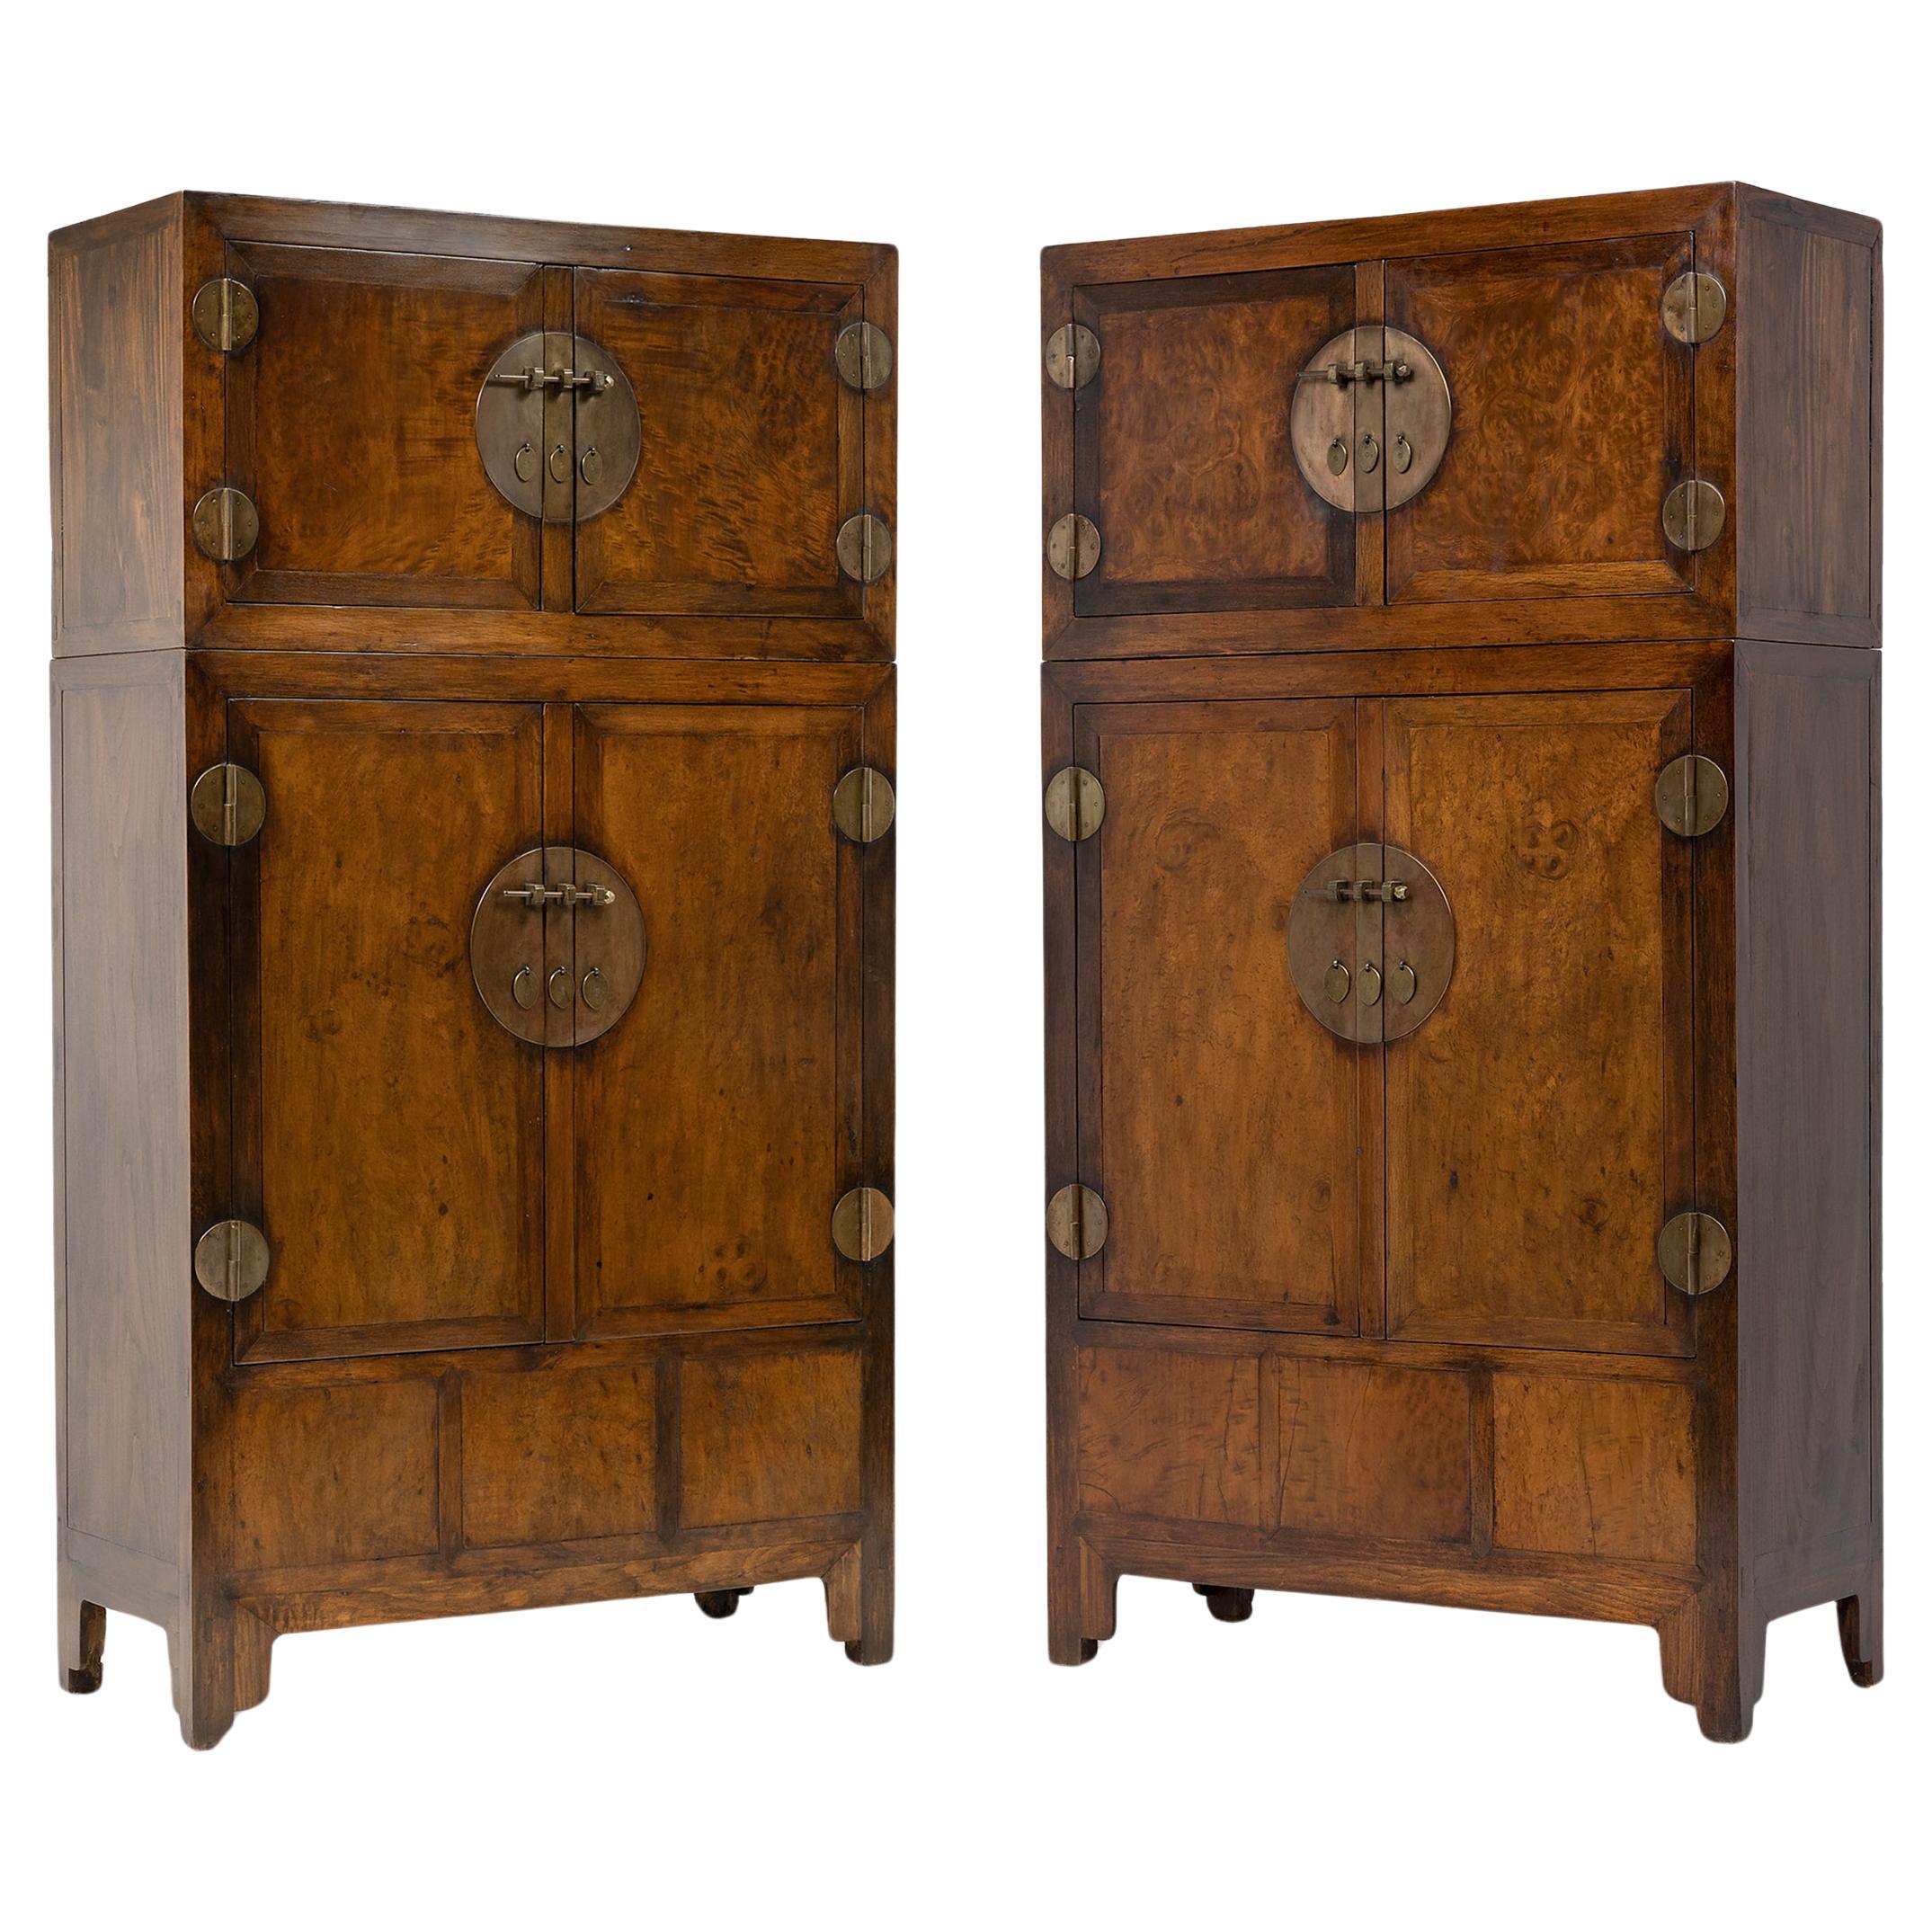 Pair of Chinese Camphor Burl Compound Cabinets, c. 1850 For Sale